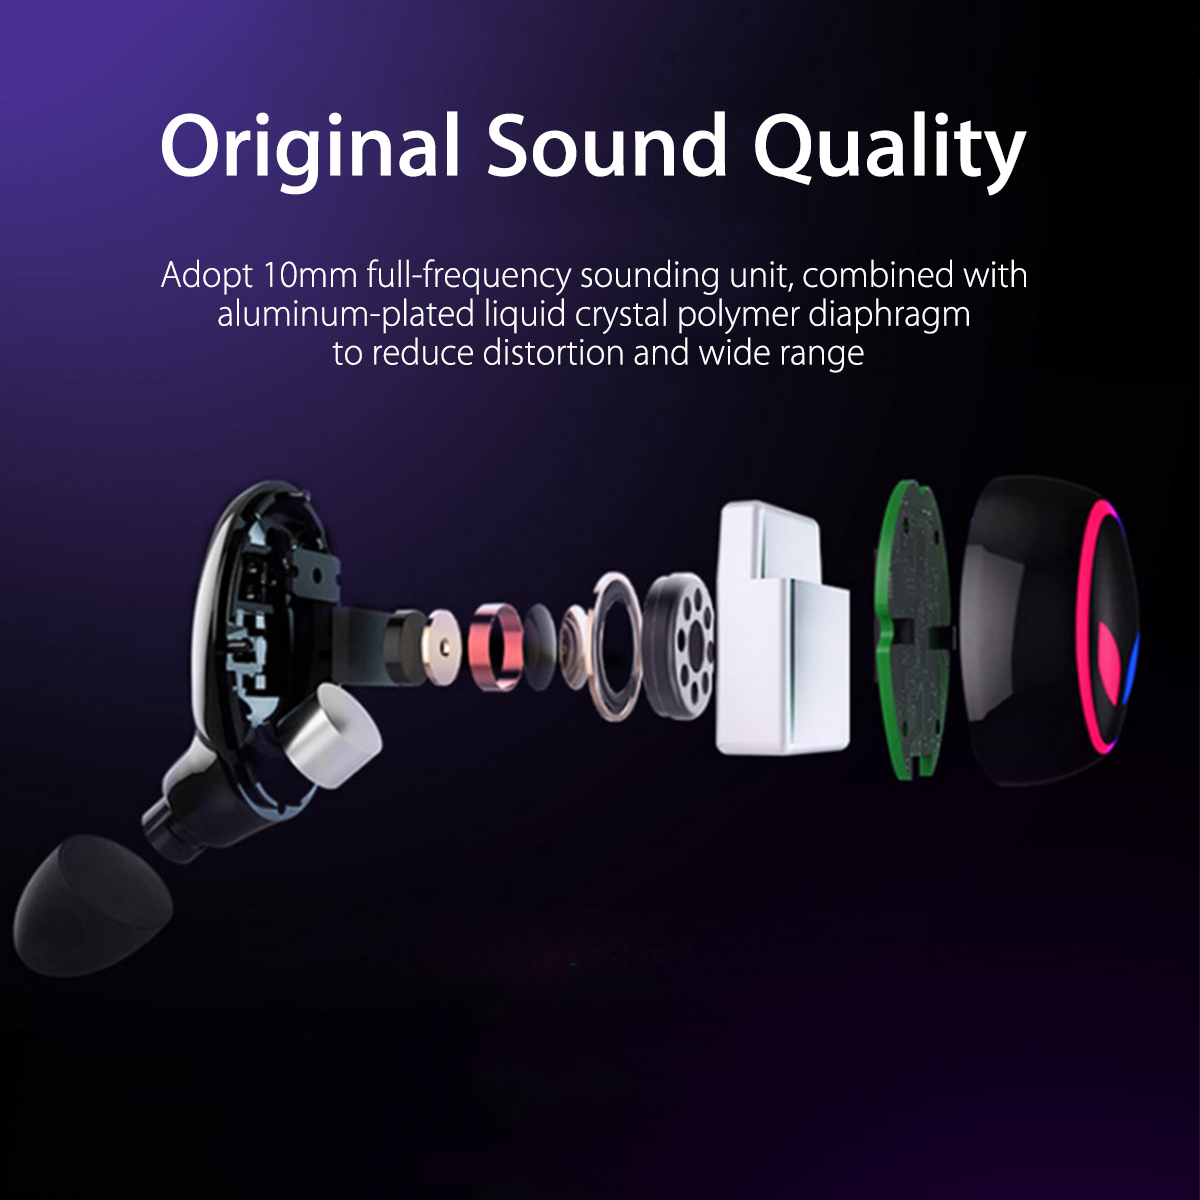 Portable-Wireless-bluetooth-50-Earphone-HiFi-Sound-Smart-Touch-Noise-Cancelling-Bliateral-Call-Headp-1458334-2